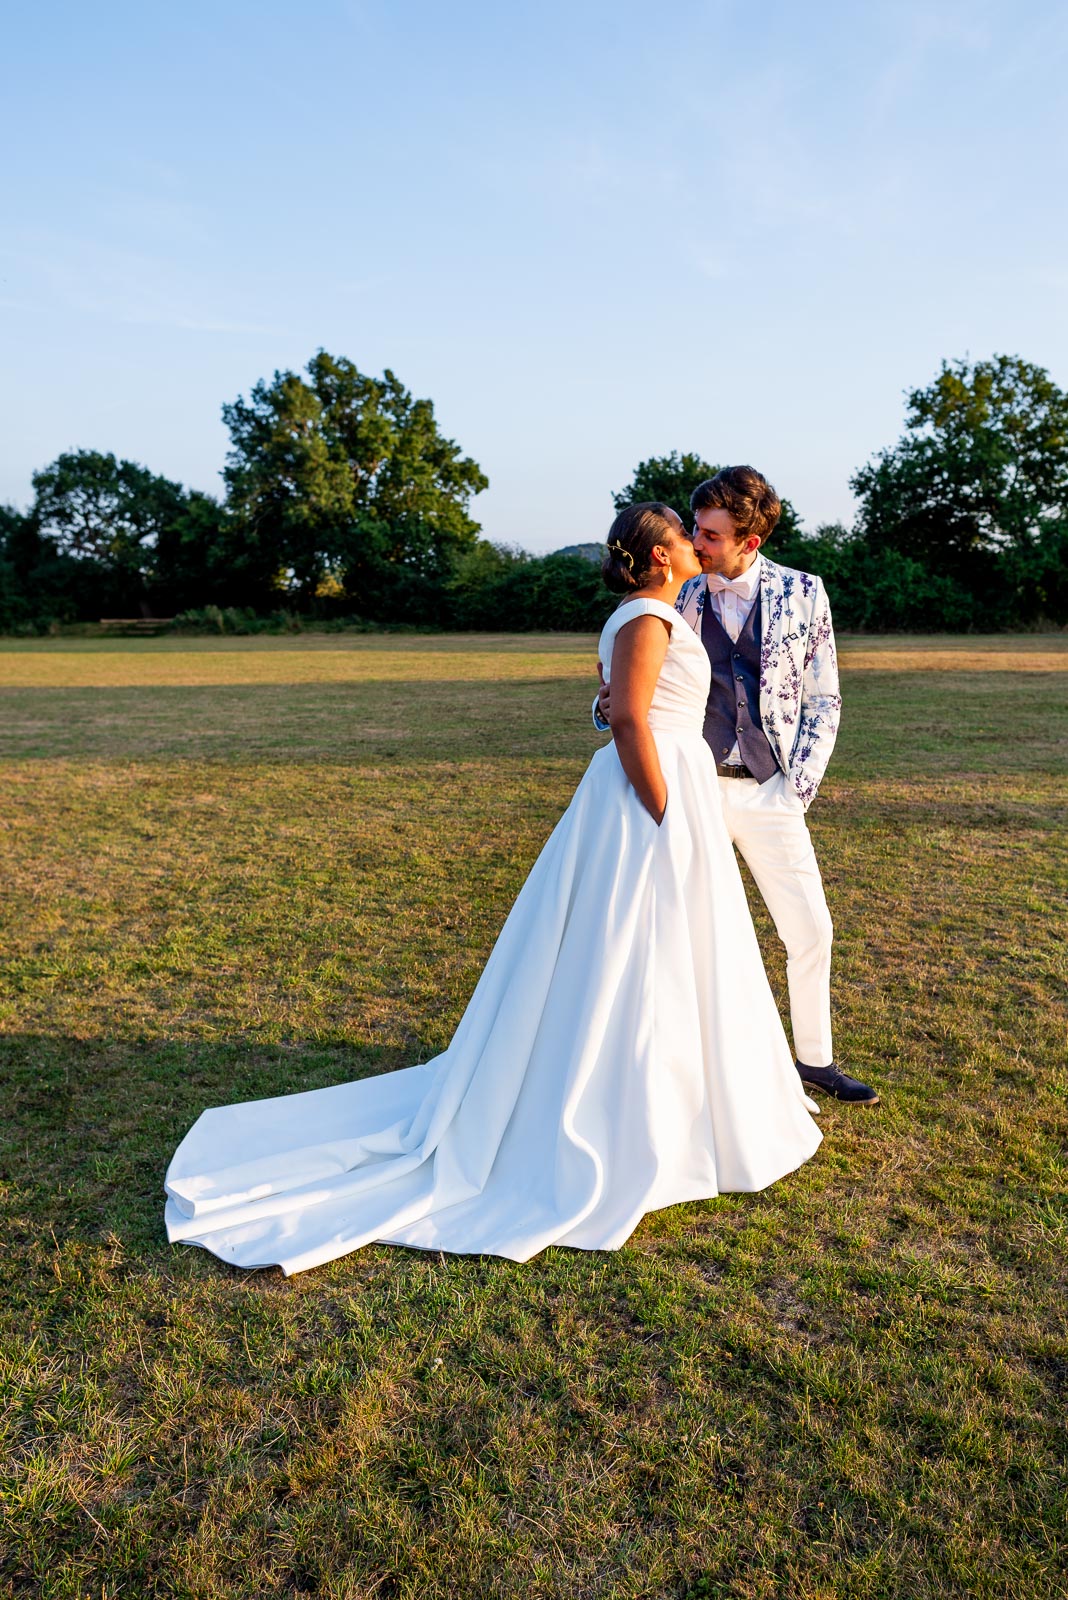 Edward and Olivia embrace in some low, warm sunlight at their Wedding Reception in Beechwood Hall & Rural Park.